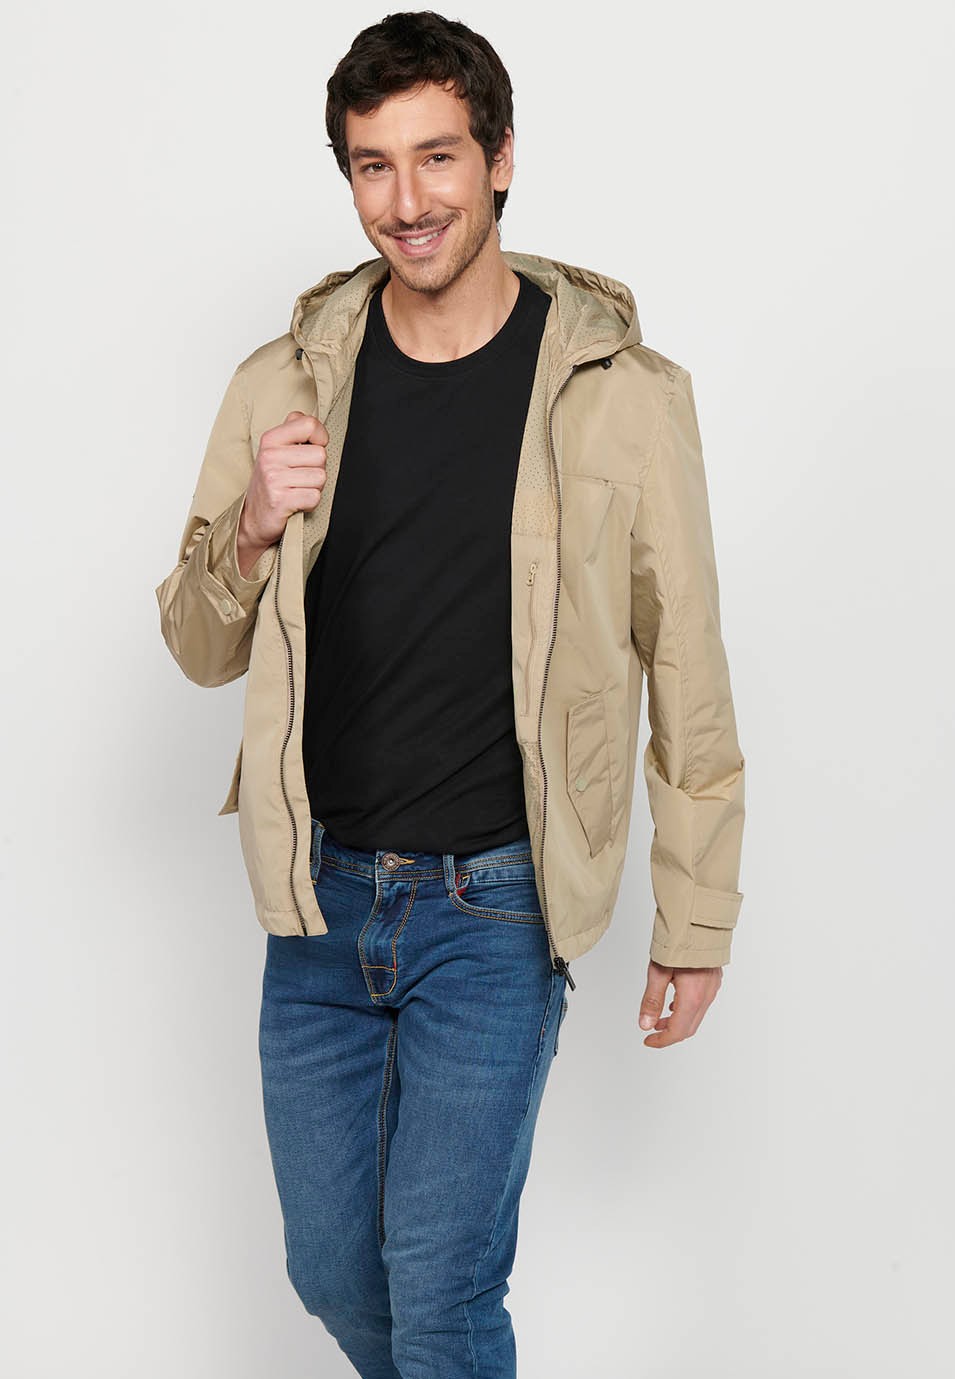 Water Repellent Jacket with Hooded Collar and Front Zipper Closure, Beige Pockets for Men 9